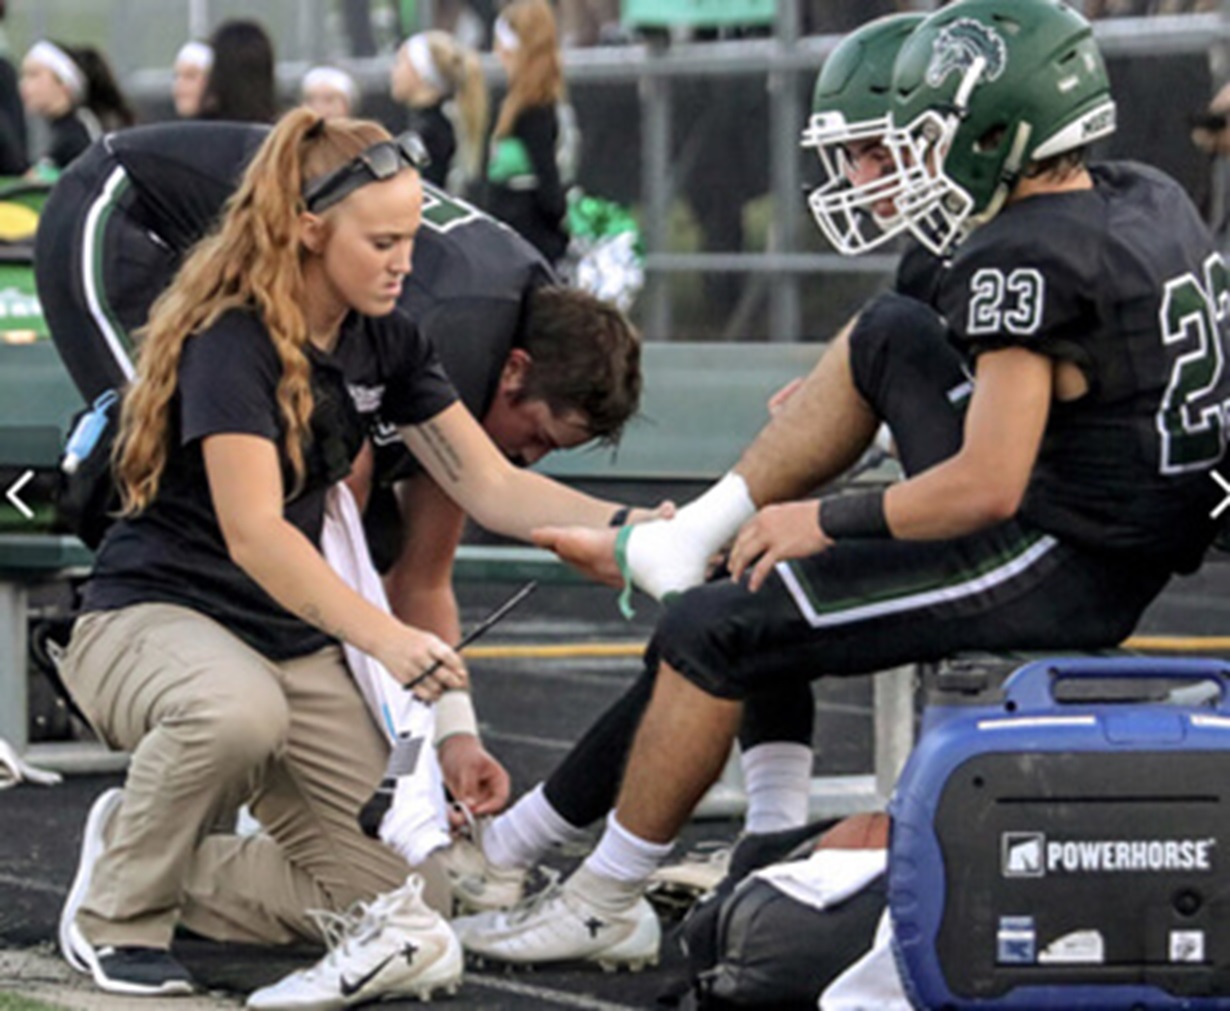 Athletic trainer assisting football player